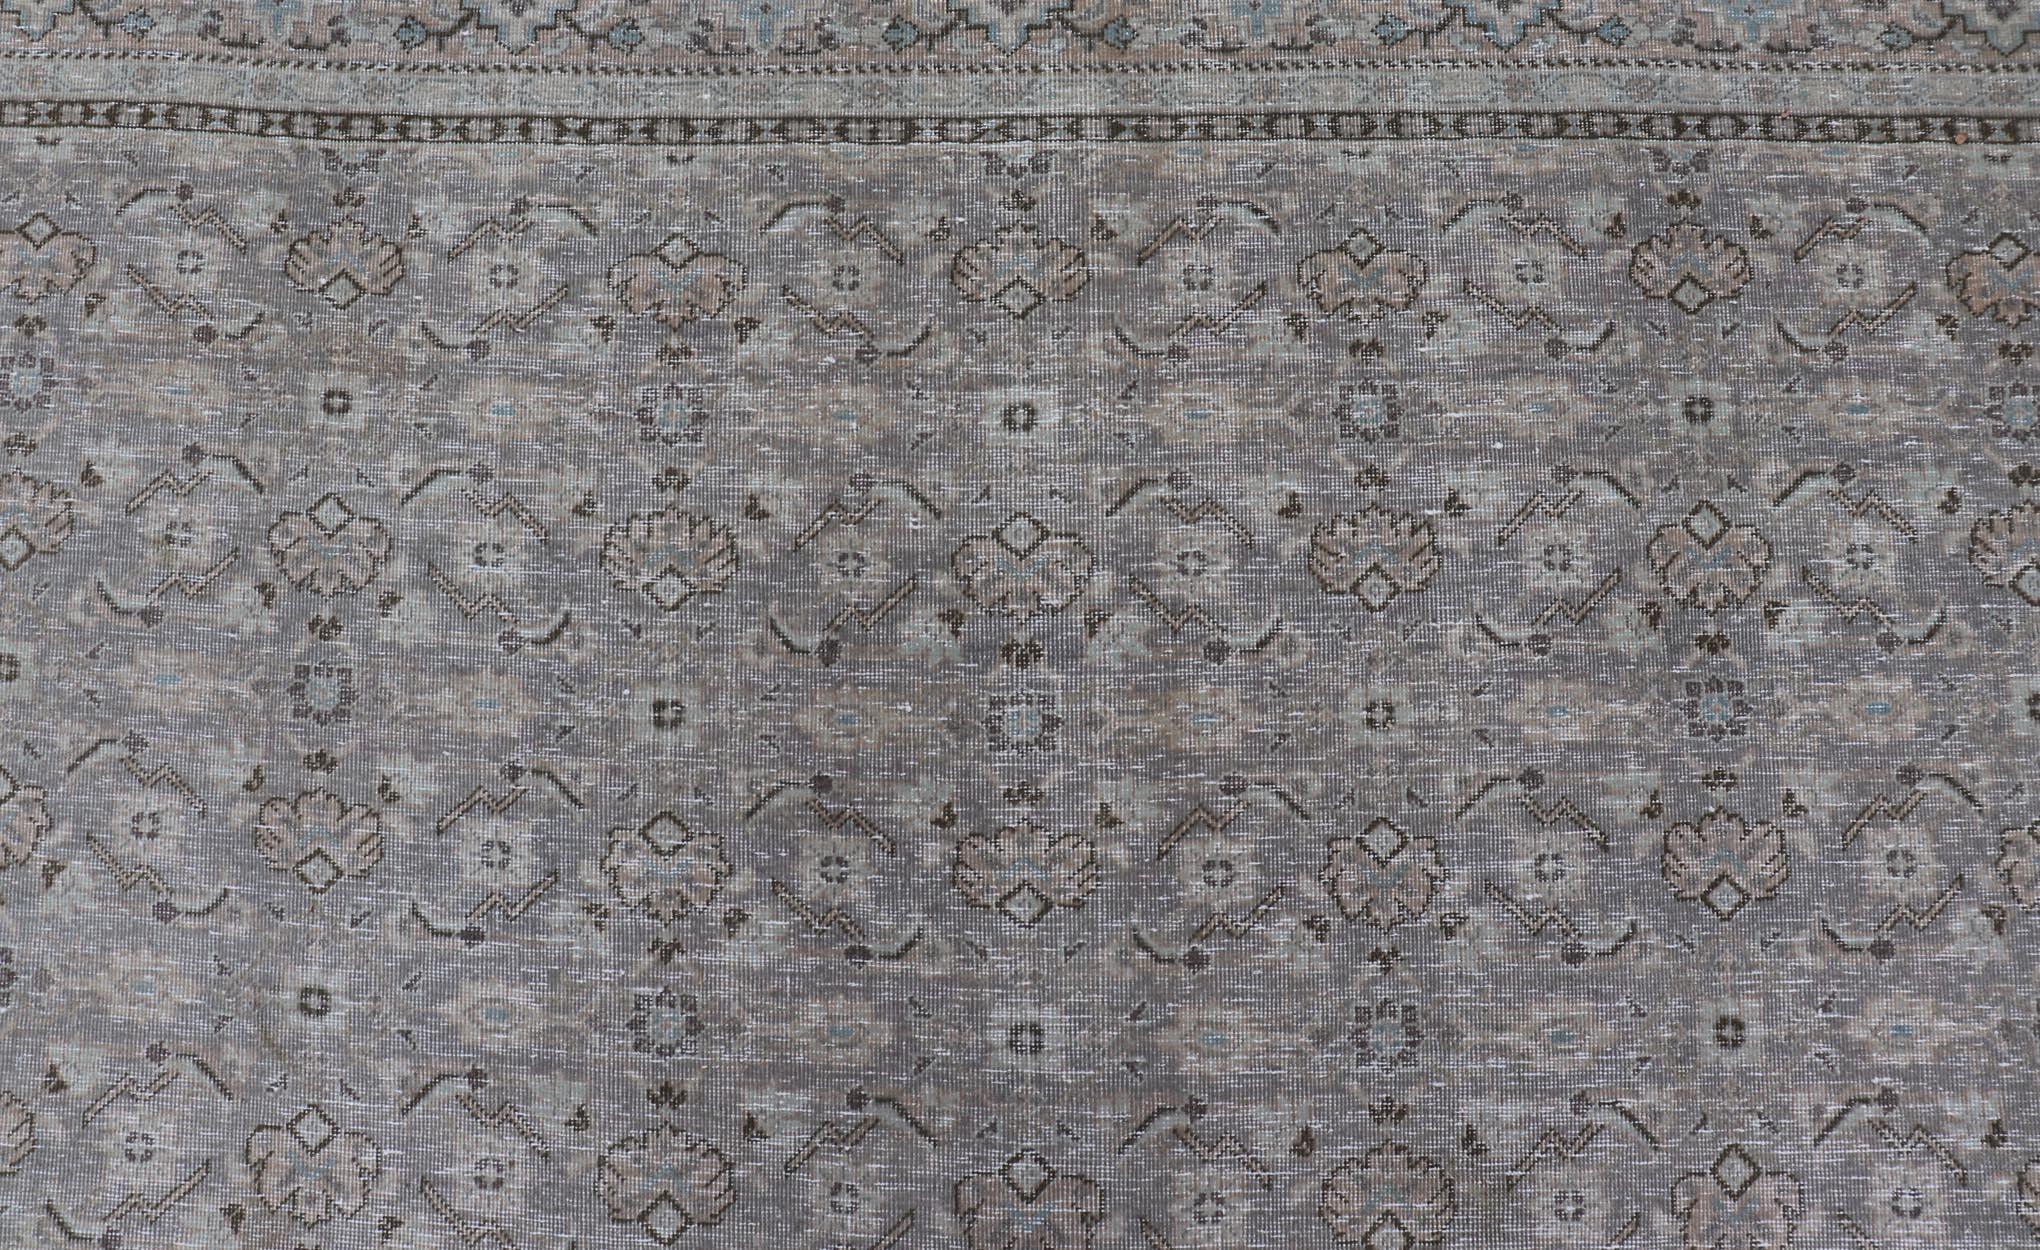 Antique Persian Tabriz Rug in All-Over Herati in Shades of Lavender and Tan  For Sale 7